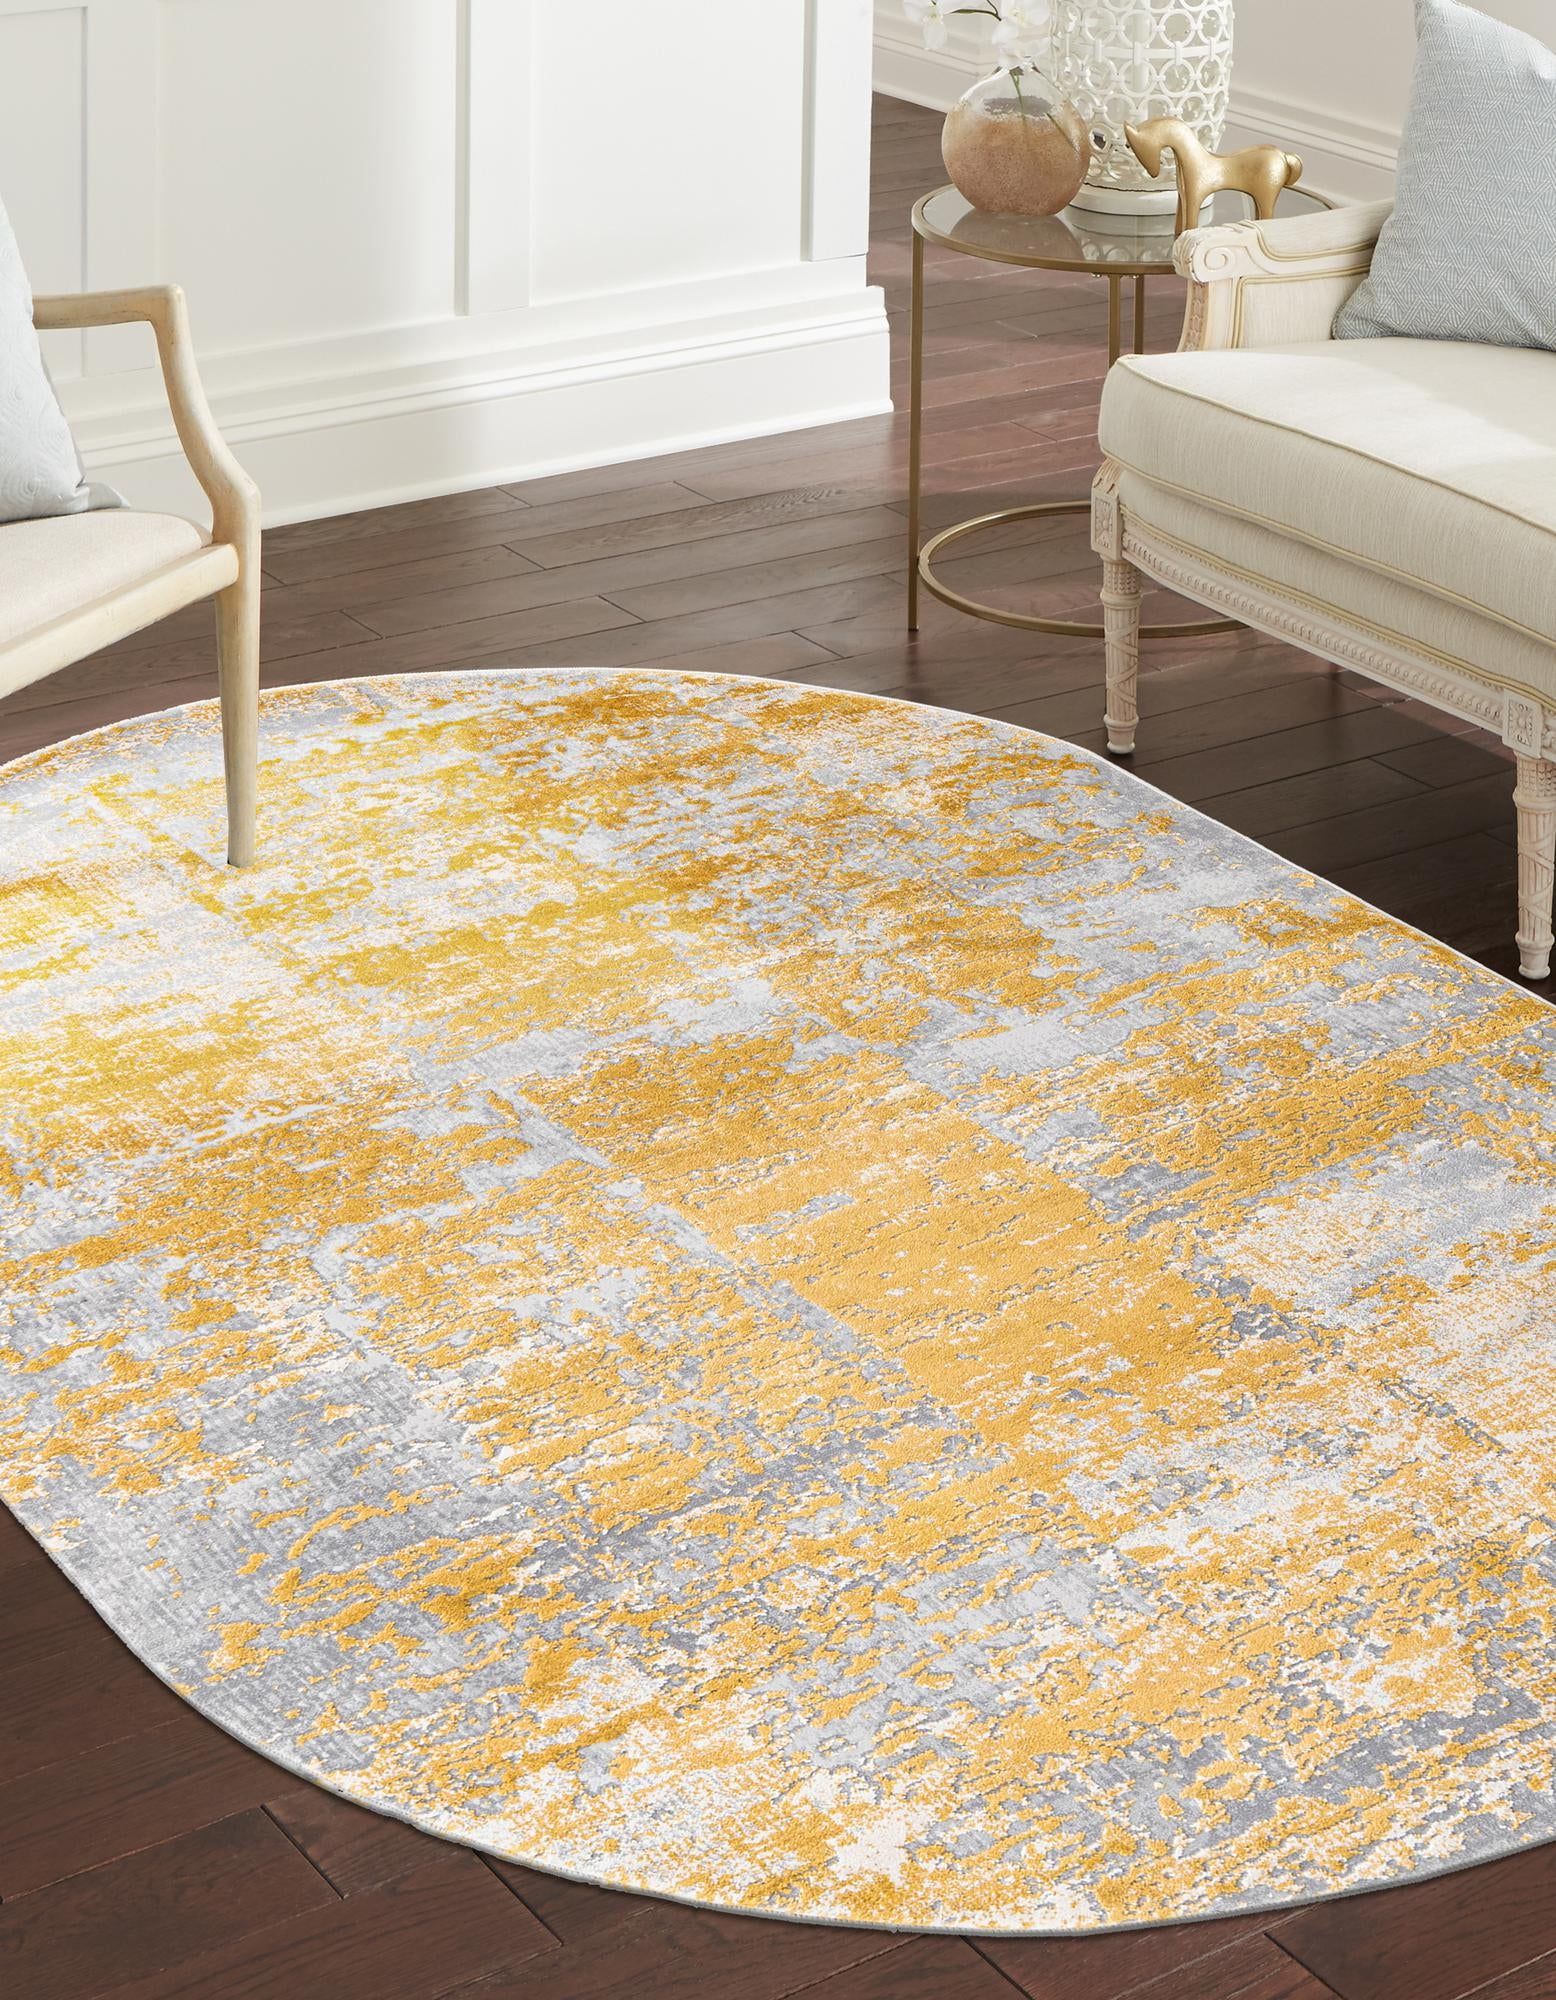 Yellow 7' 10 X 10' Finsbury Oval Rug | Outdoorrugs With Regard To Finsbury Runner Rugs (Photo 11 of 15)